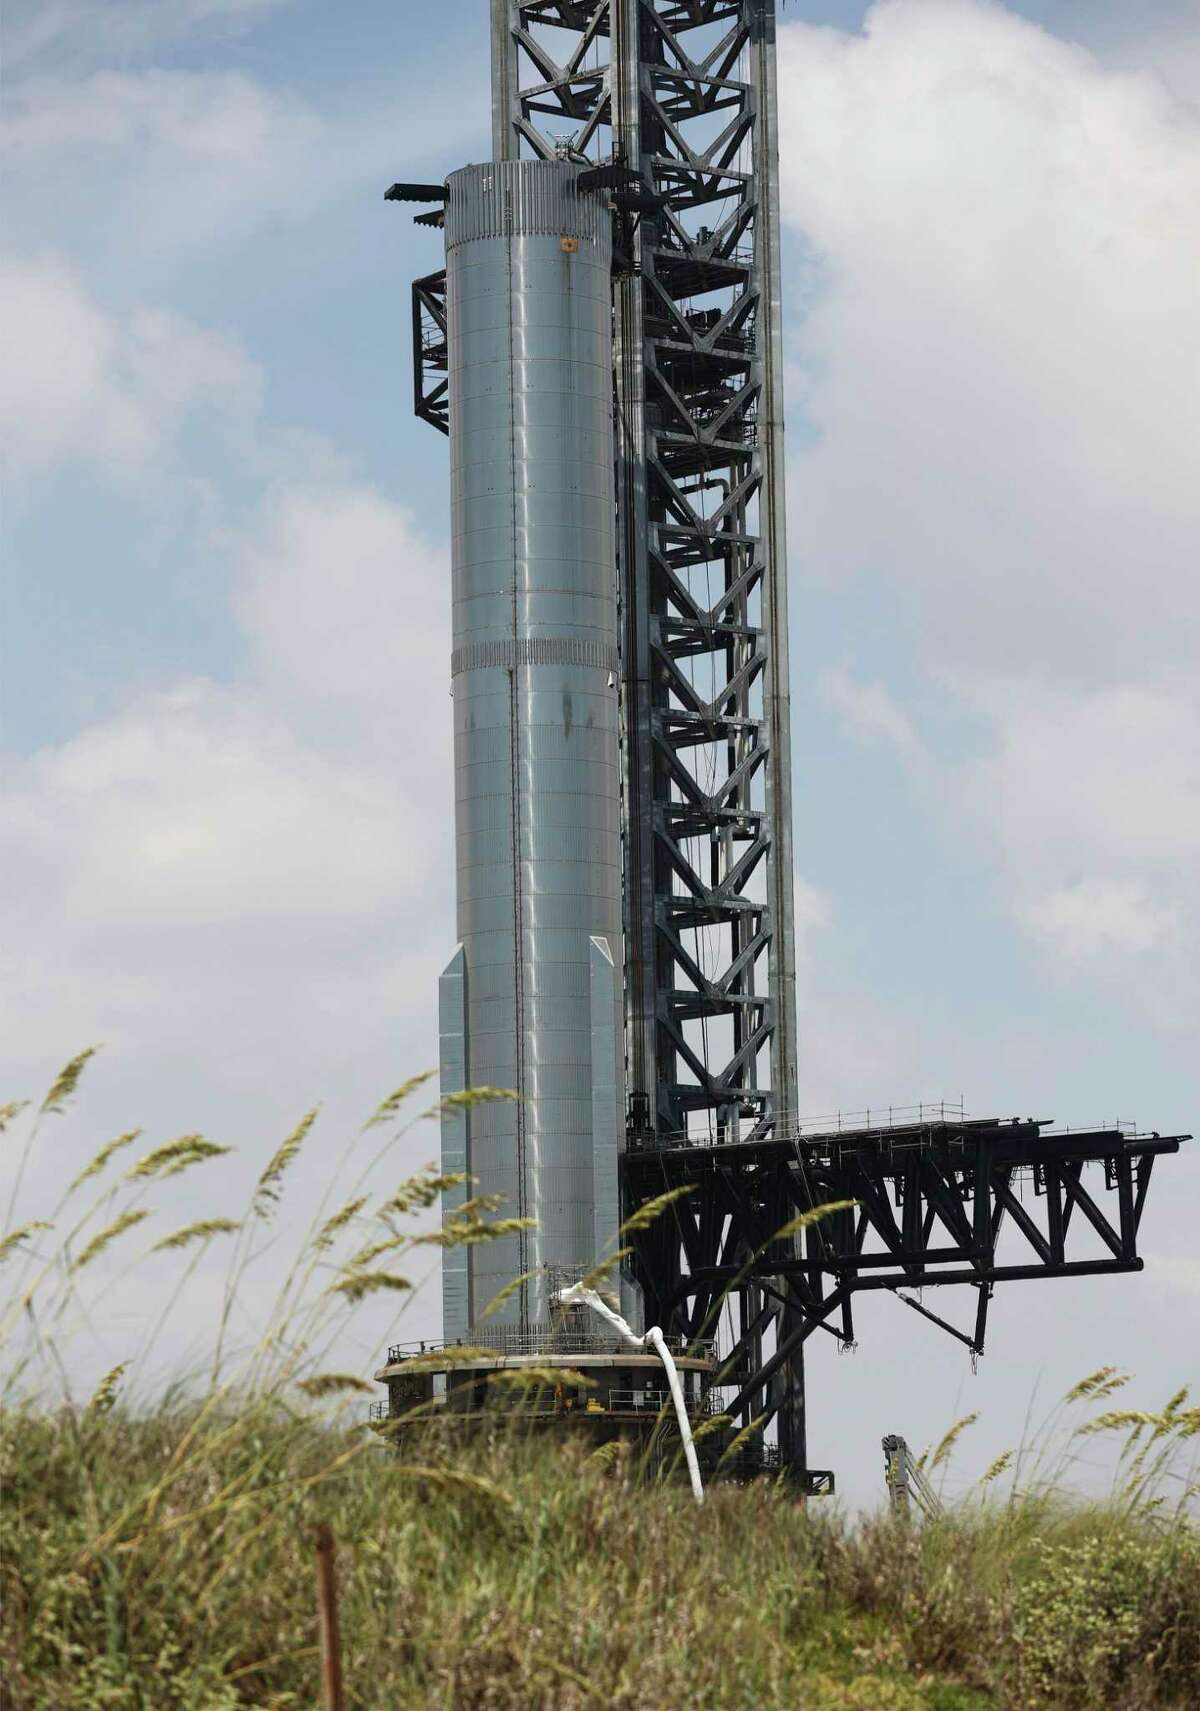 SpaceX Booster 7 on the launch pad July 1. During static testing Monday, the booster burst into flames, possibly slowing plans for a SpaceX orbital launch from South Texas.